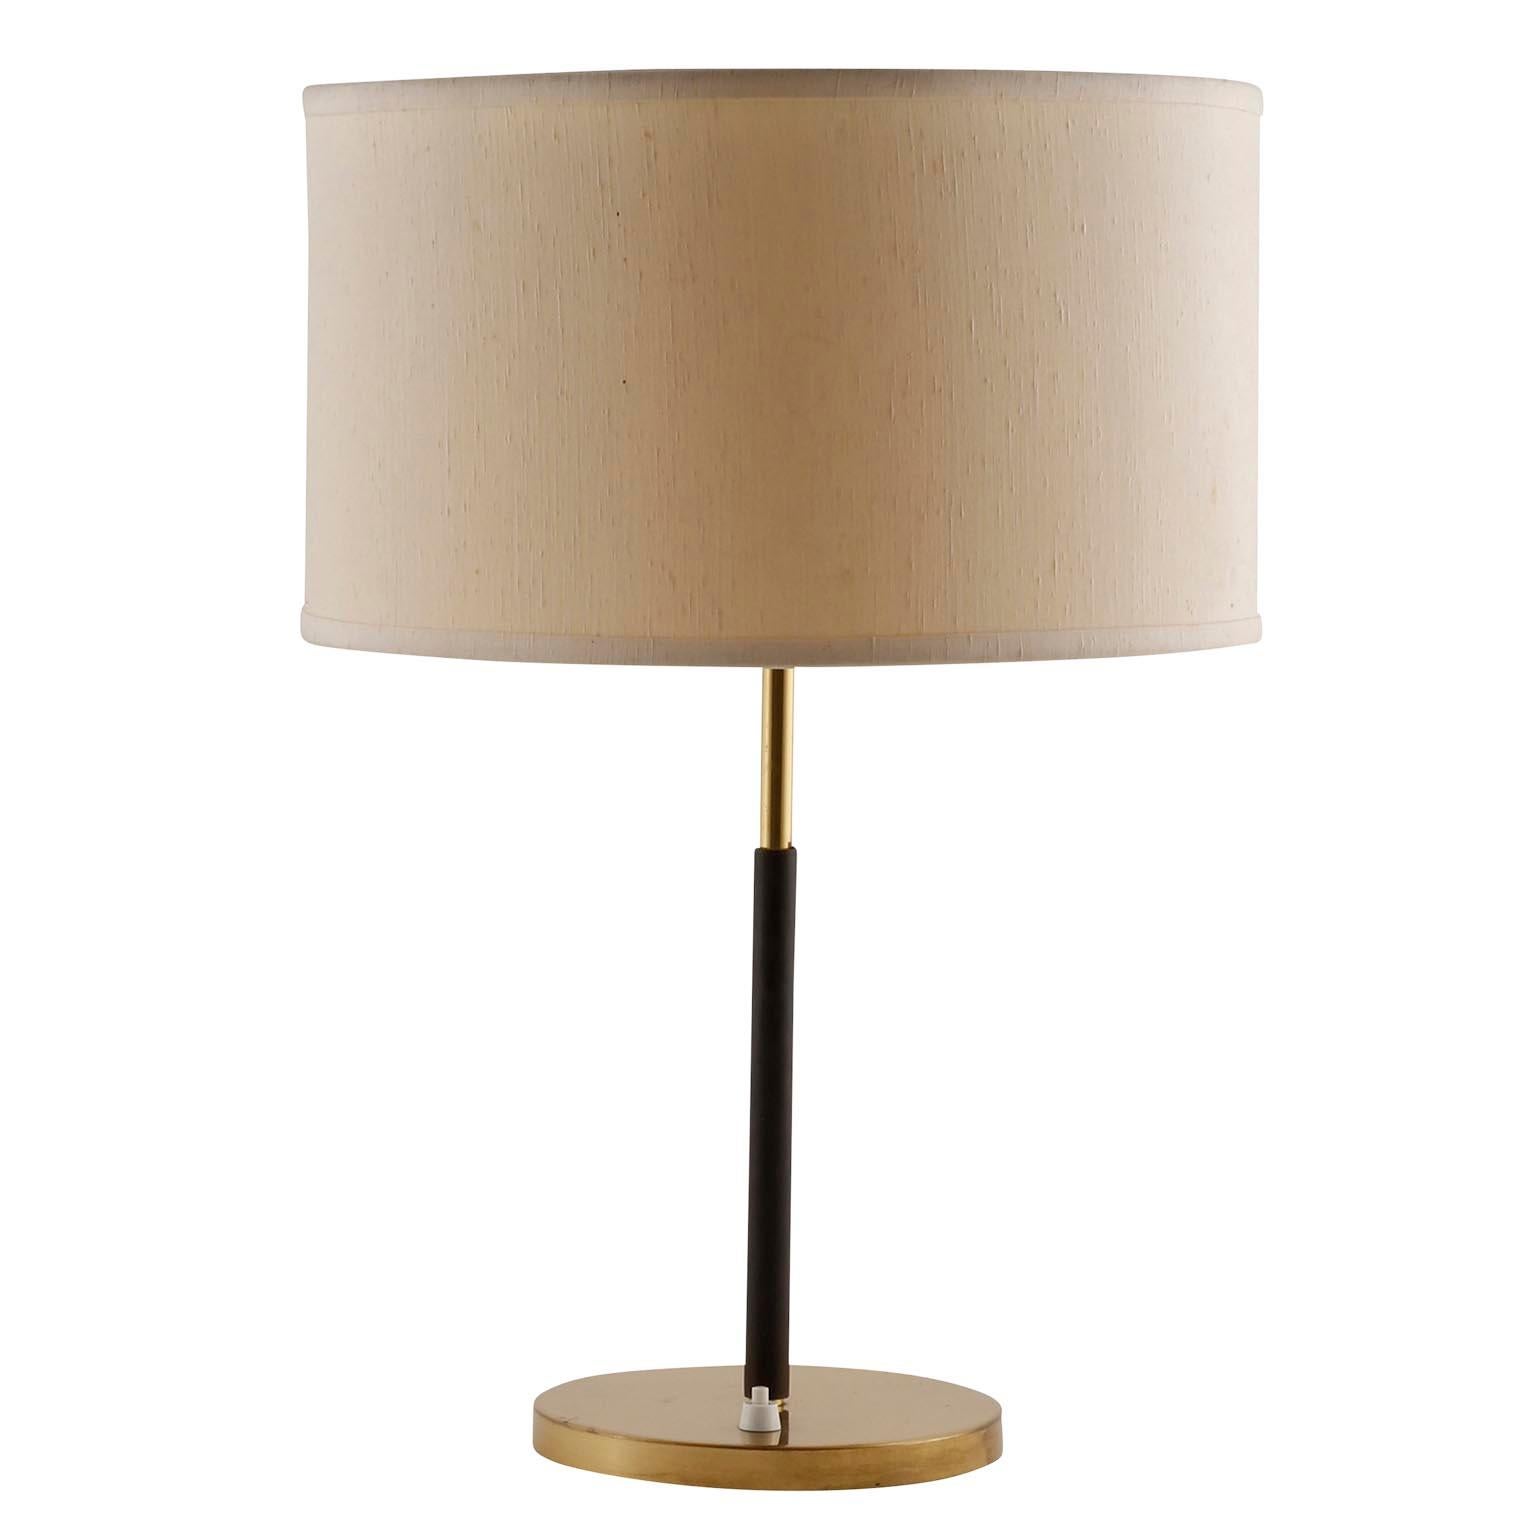 A pair of table lamps by J.T. Kalmar, manufactured in midcentury, circa 1960.
They are made of a brass covered base, a covered Stand with dark brown leather, brass fittings, and a cream colored lampshade.
Each lamp takes two medium or standard